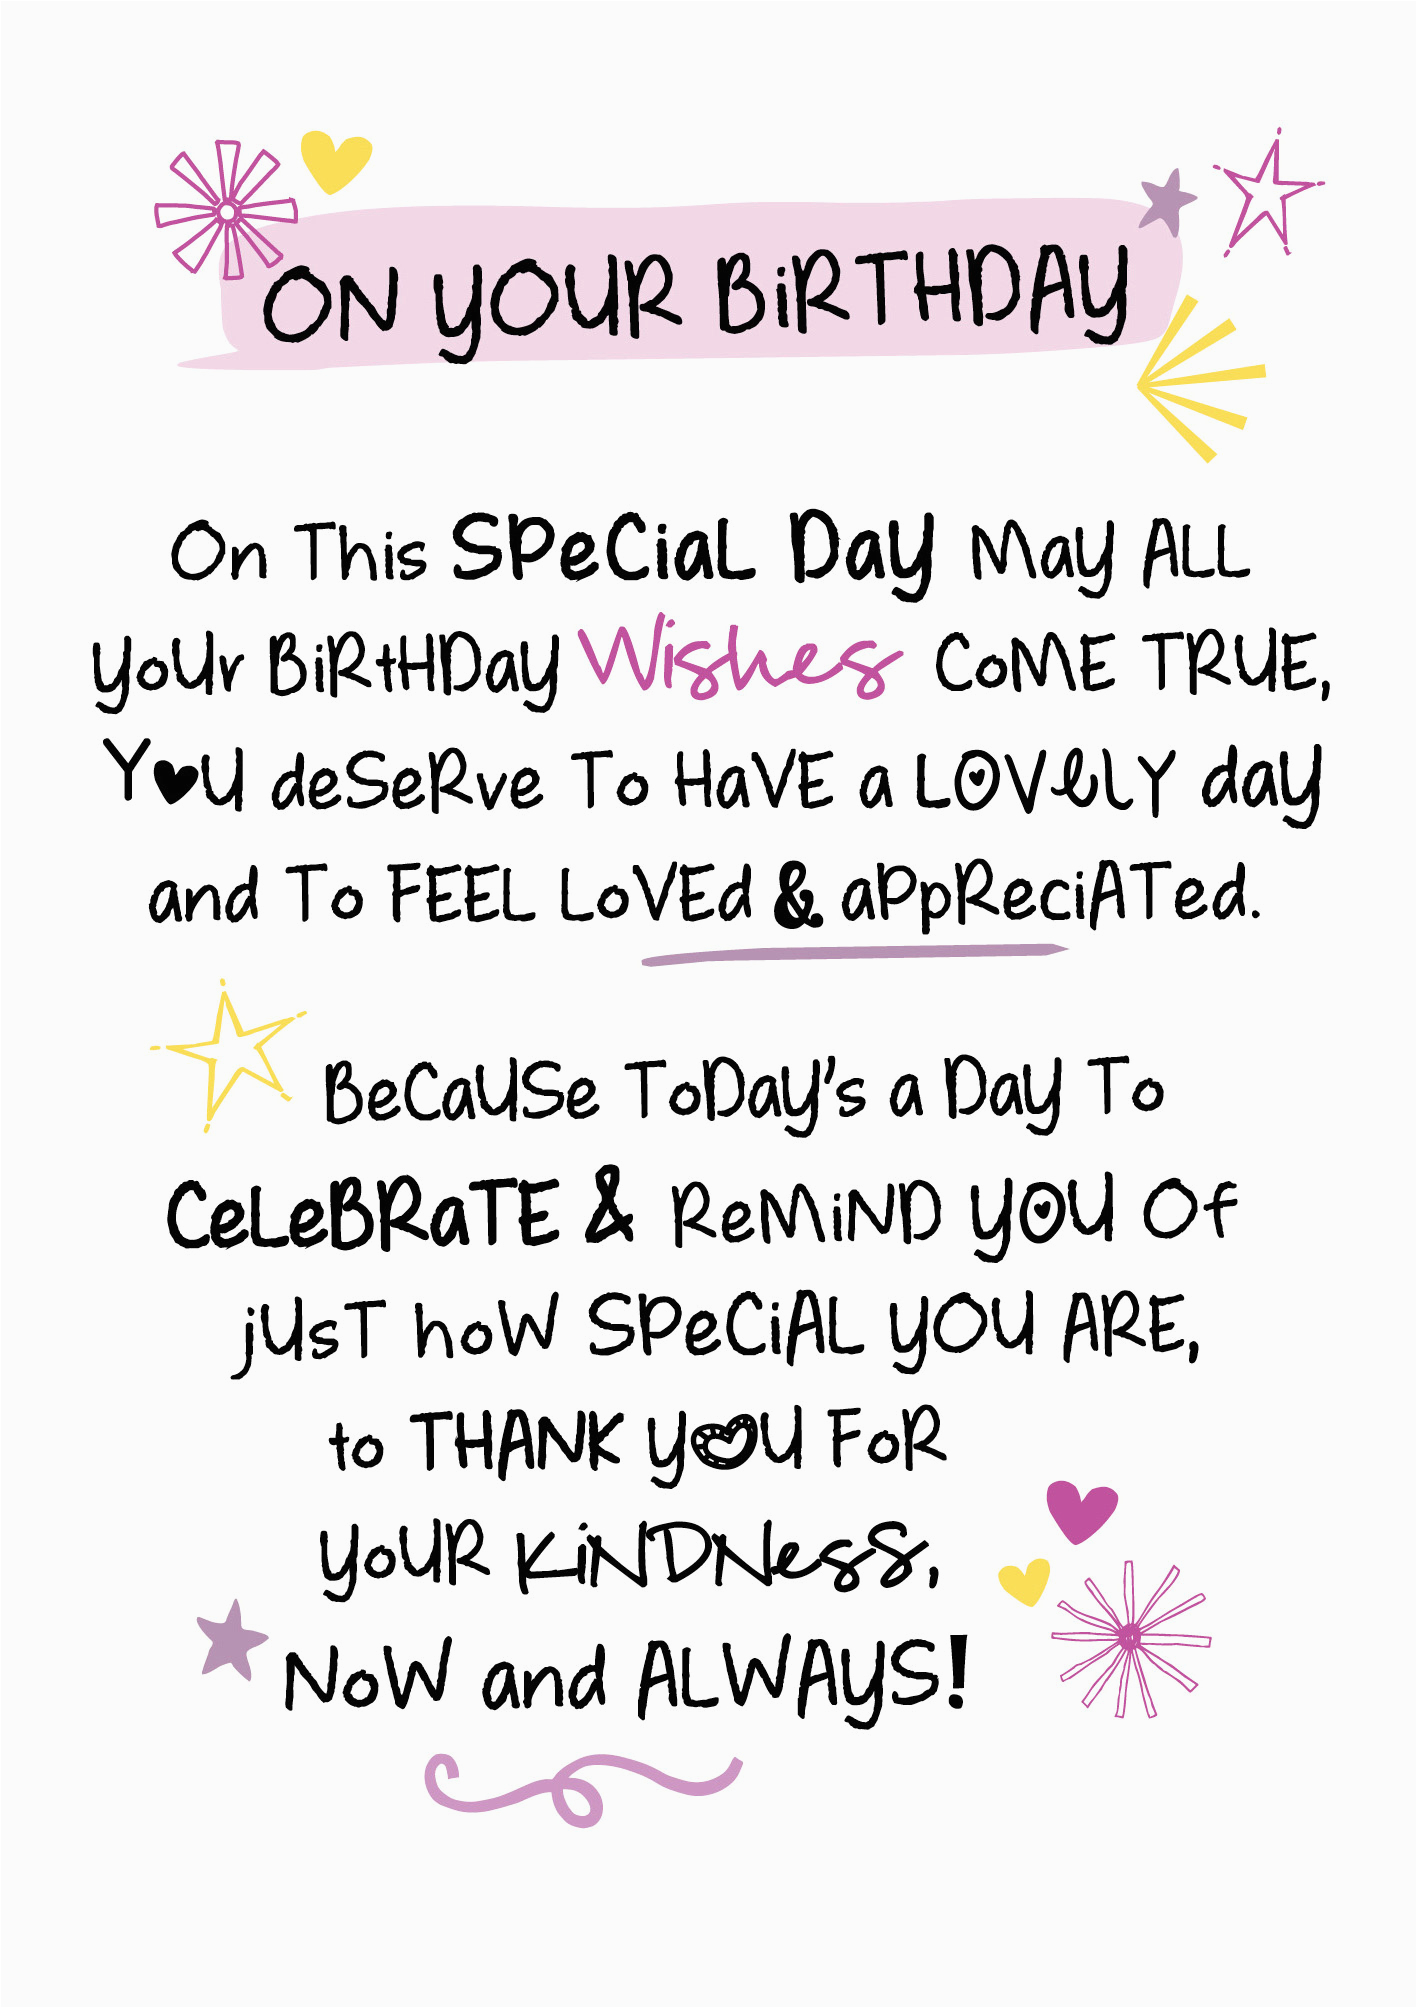 kciwptr091 on your birthday inspired words greeting card blank inside